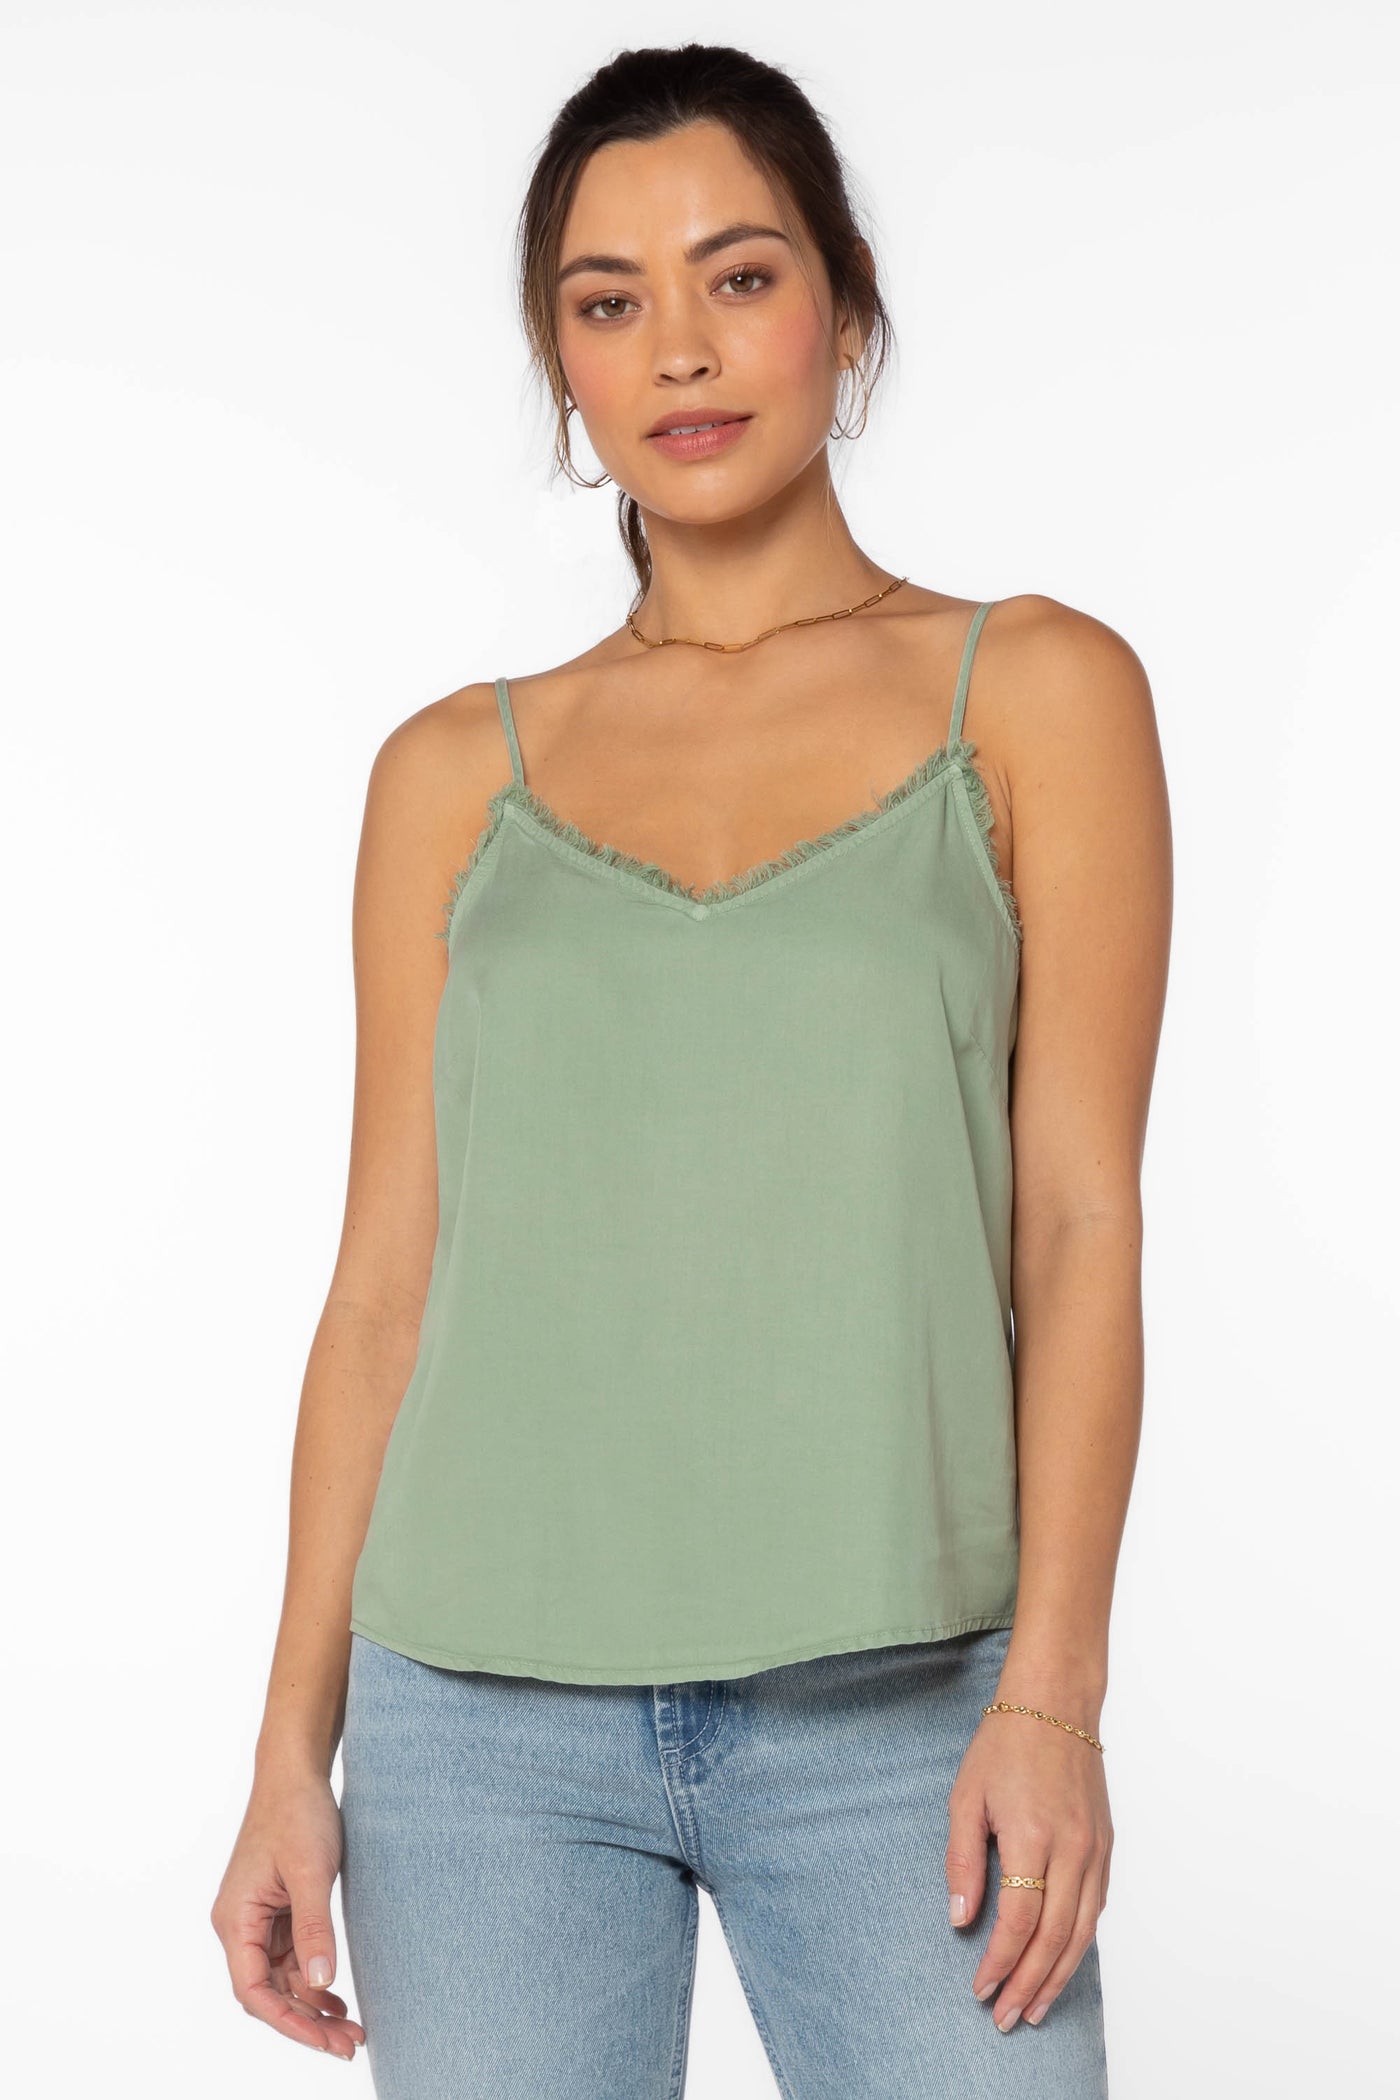 Victory Sage Cami - Tops - Velvet Heart Clothing